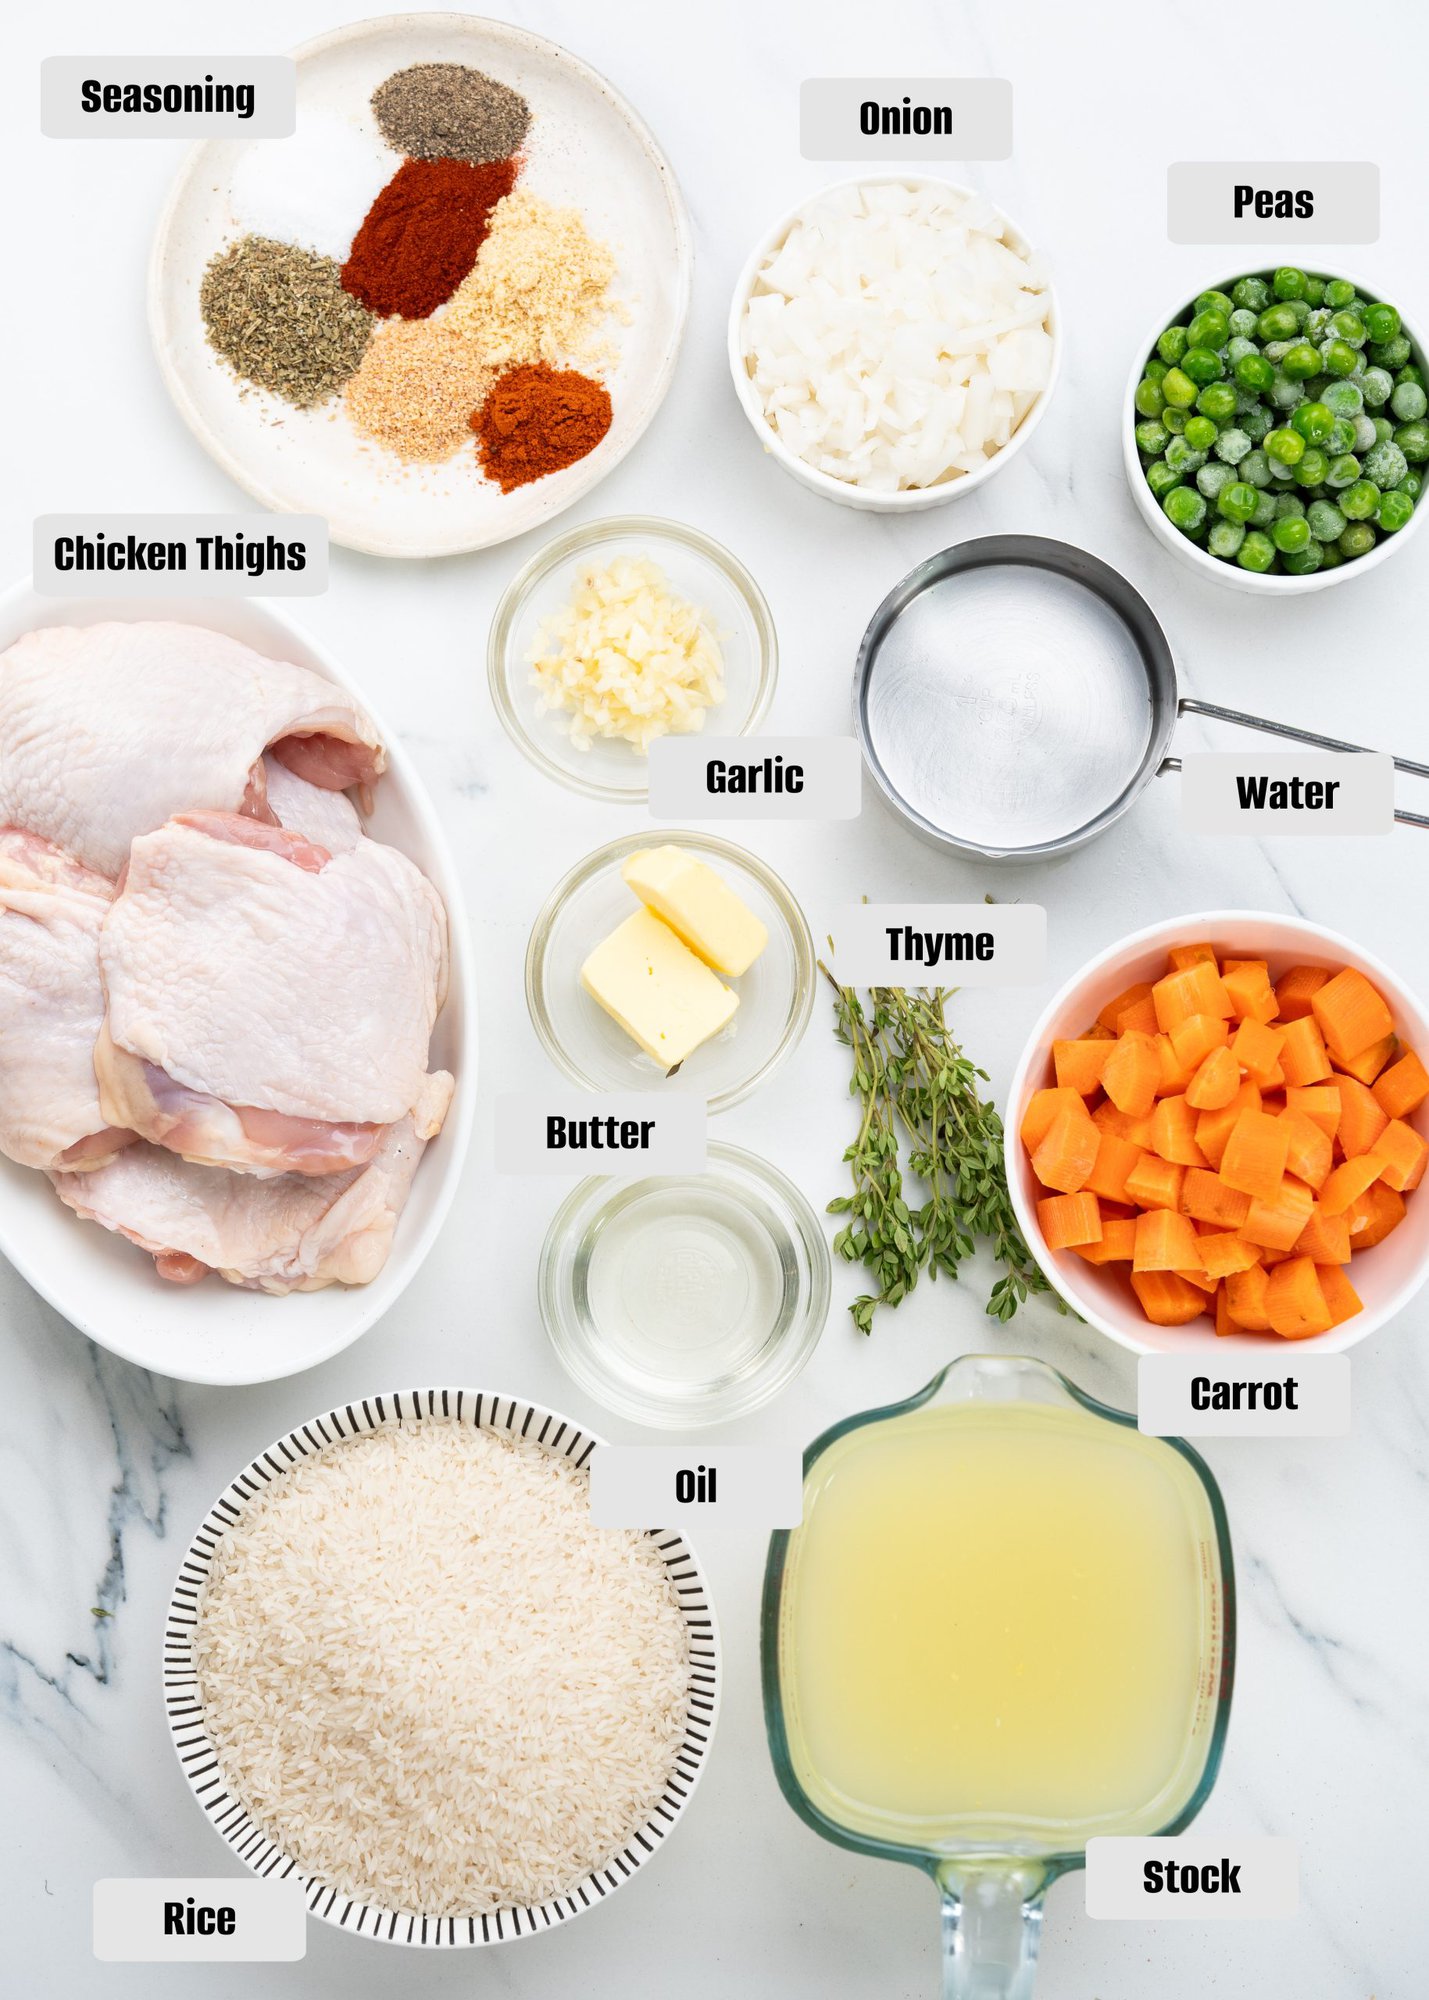 This image has Ingredients for Oven baked chicken and rice. 